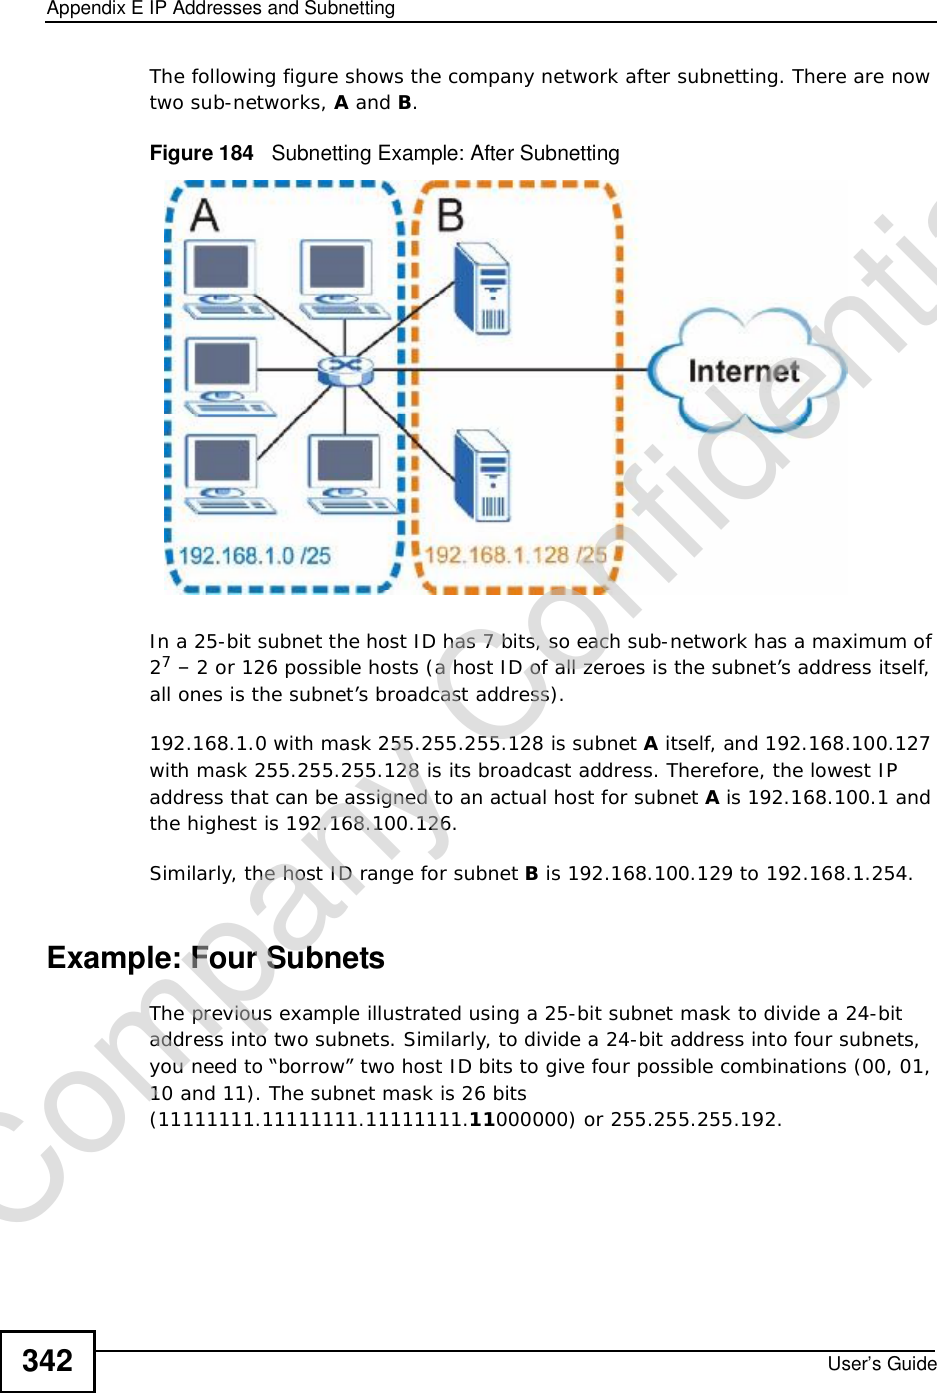 Appendix EIP Addresses and SubnettingUser’s Guide342The following figure shows the company network after subnetting. There are now two sub-networks, A and B.Figure 184   Subnetting Example: After SubnettingIn a 25-bit subnet the host ID has 7 bits, so each sub-network has a maximum of 27 – 2 or 126 possible hosts (a host ID of all zeroes is the subnet’s address itself, all ones is the subnet’s broadcast address).192.168.1.0 with mask 255.255.255.128 is subnet A itself, and 192.168.100.127 with mask 255.255.255.128 is its broadcast address. Therefore, the lowest IP address that can be assigned to an actual host for subnet A is 192.168.100.1 and the highest is 192.168.100.126. Similarly, the host ID range for subnet B is 192.168.100.129 to 192.168.1.254.Example: Four Subnets The previous example illustrated using a 25-bit subnet mask to divide a 24-bit address into two subnets. Similarly, to divide a 24-bit address into four subnets, you need to “borrow” two host ID bits to give four possible combinations (00, 01, 10 and 11). The subnet mask is 26 bits (11111111.11111111.11111111.11000000) or 255.255.255.192. Company Confidential